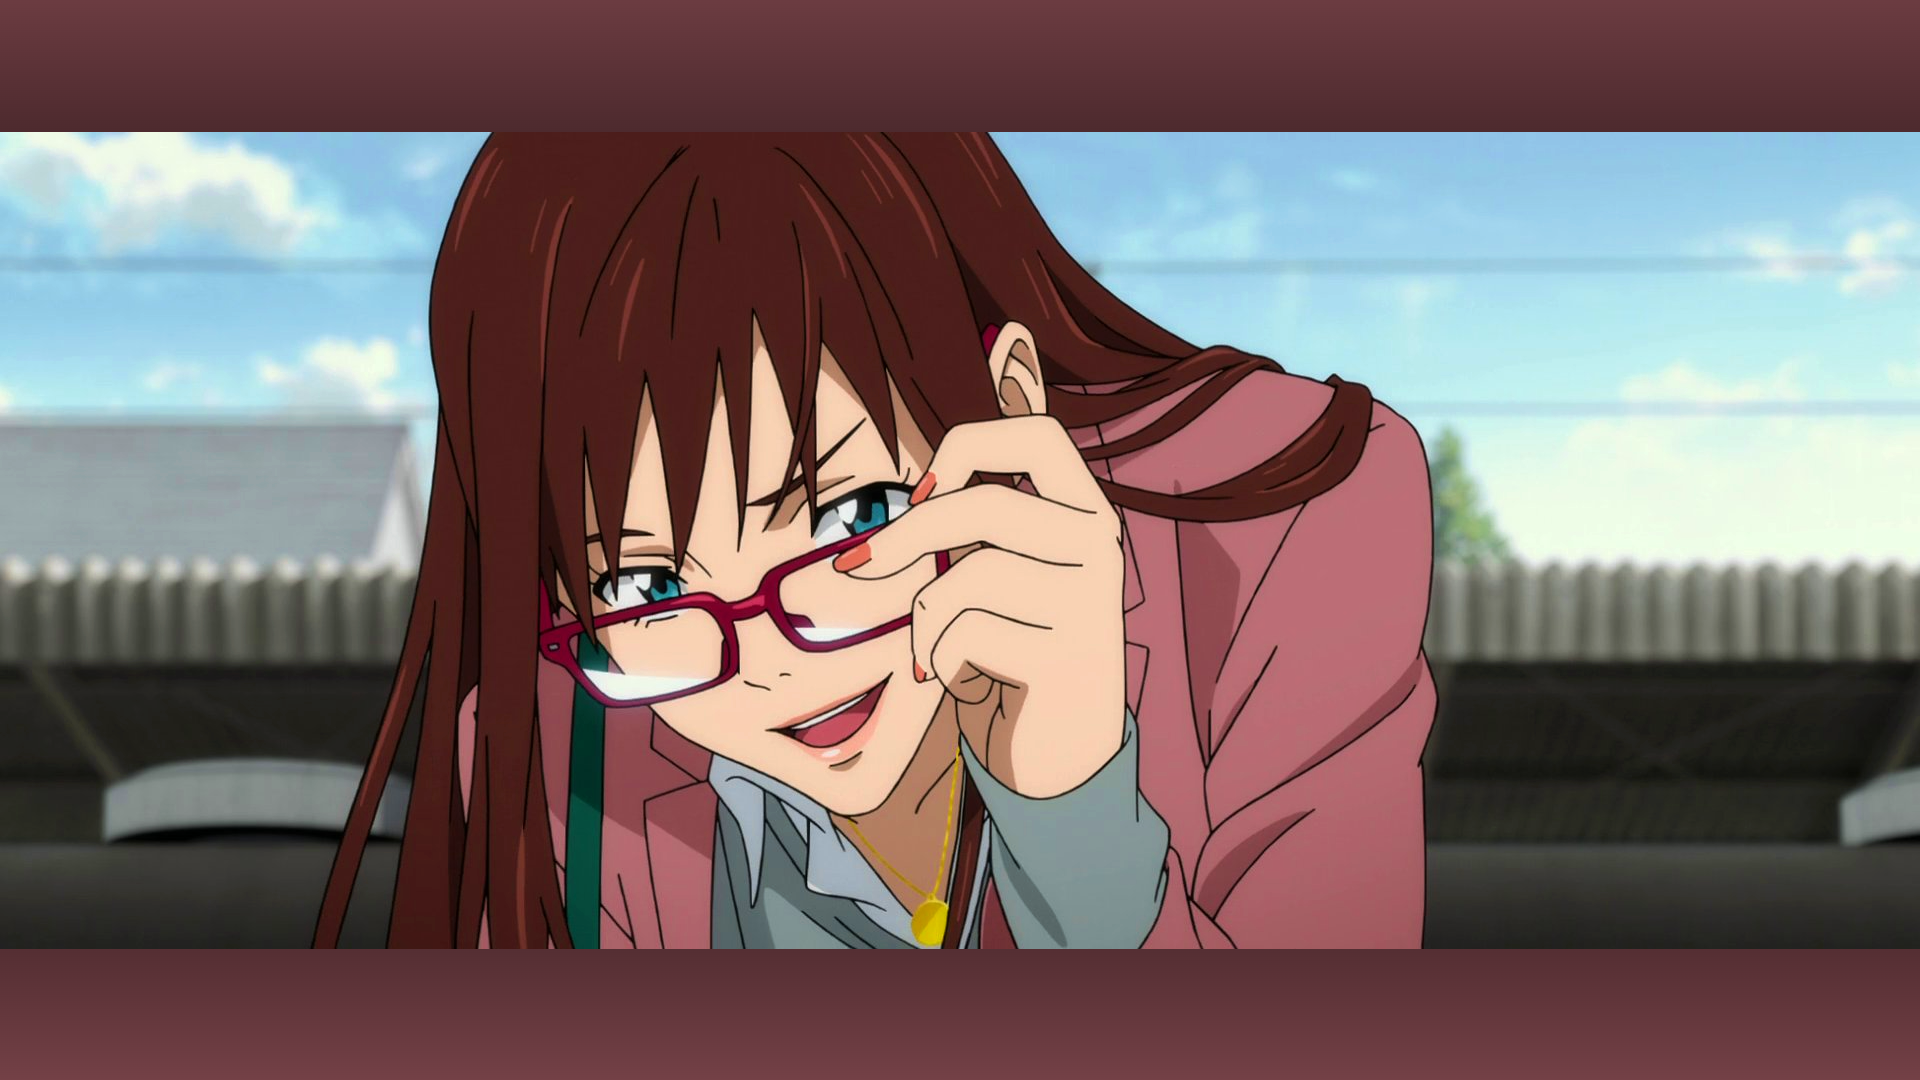 Anime 1920x1080 Anime screenshot Neon Genesis Evangelion Rebuild of Evangelion Evangelion: 3.0 + 1.0 Thrice Upon a Time glasses brunette blue eyes jacket open mouth bangs touching glasses bag pink nails colored nails blunt bangs anime girls looking at viewer smiling sky women with glasses clouds long hair